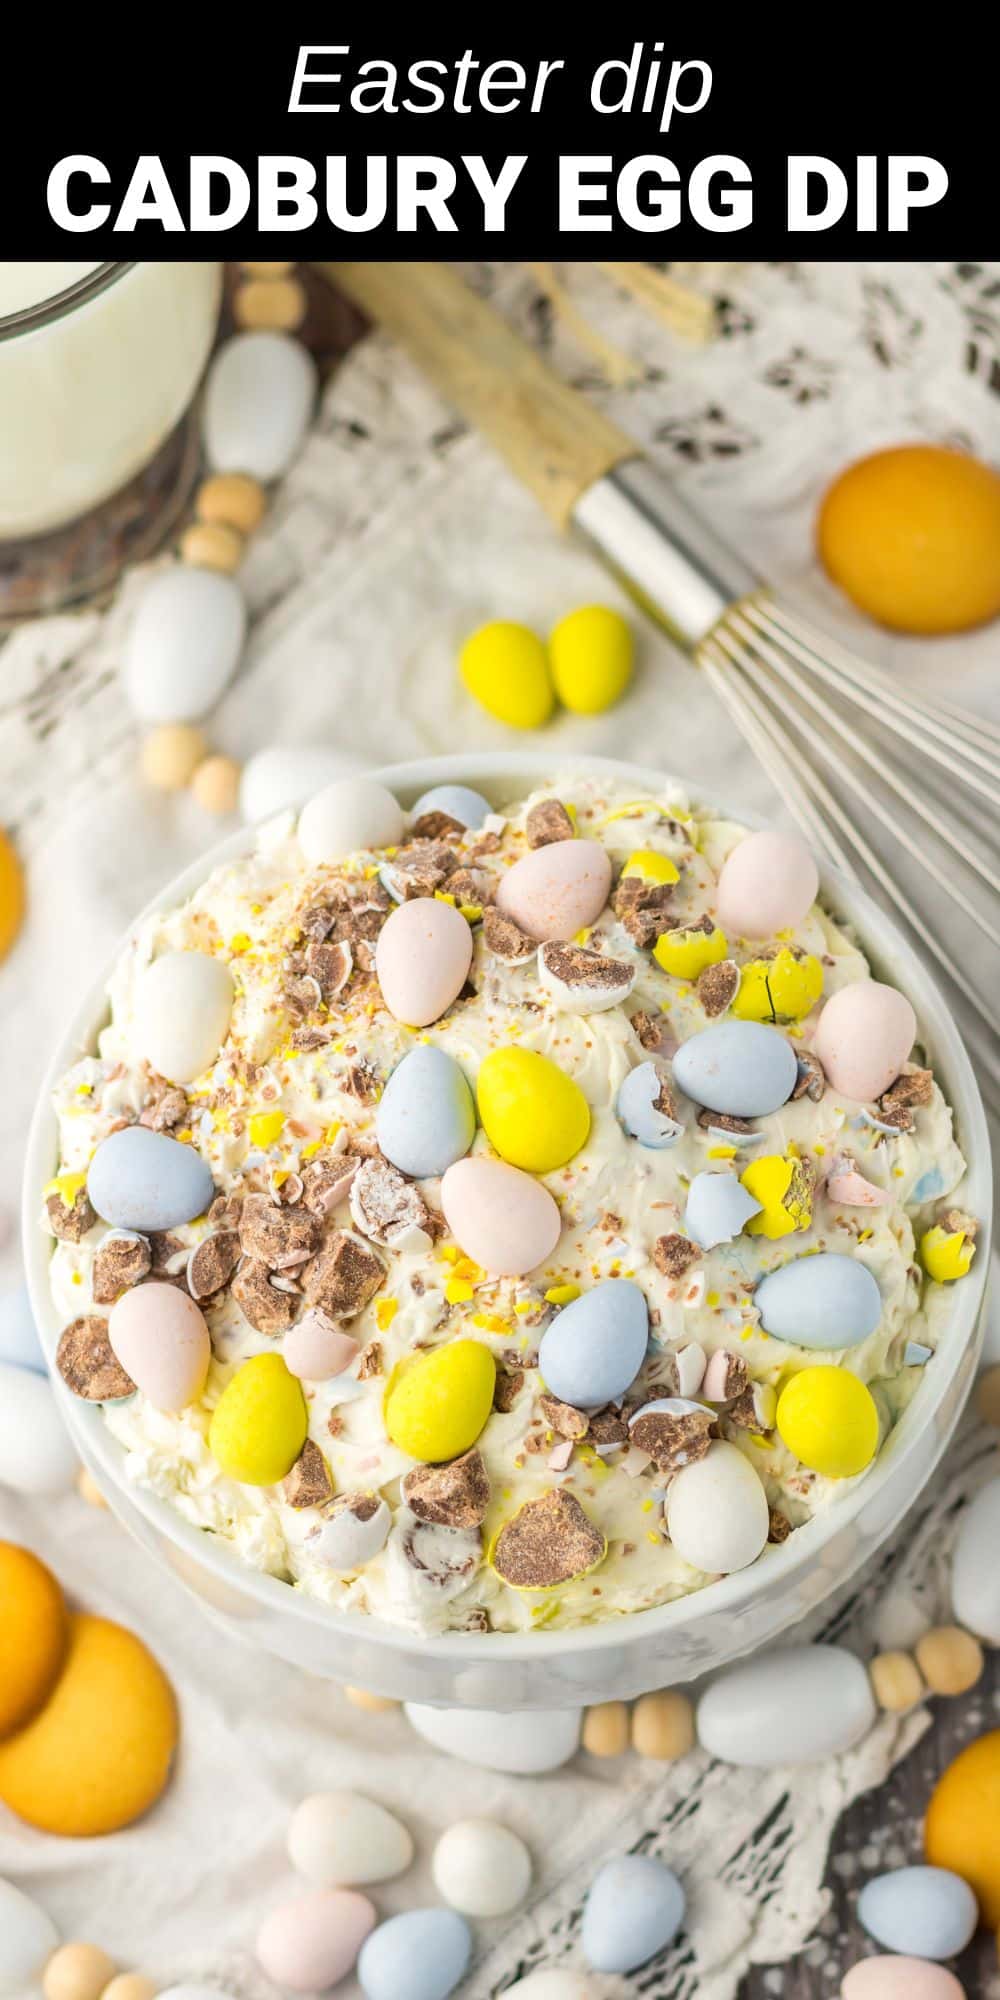 This Cadbury Egg Dip is perfect for Easter. It is a cool and creamy dip stuffed with those delicious chocolate eggs everyone loves. The dip base is cream cheese and whipped topping sweetened with powdered sugar and all those chocolate eggs. This dip is easy and quick to make and looks so pretty, it is sure to be the hit of the Easter dessert table!